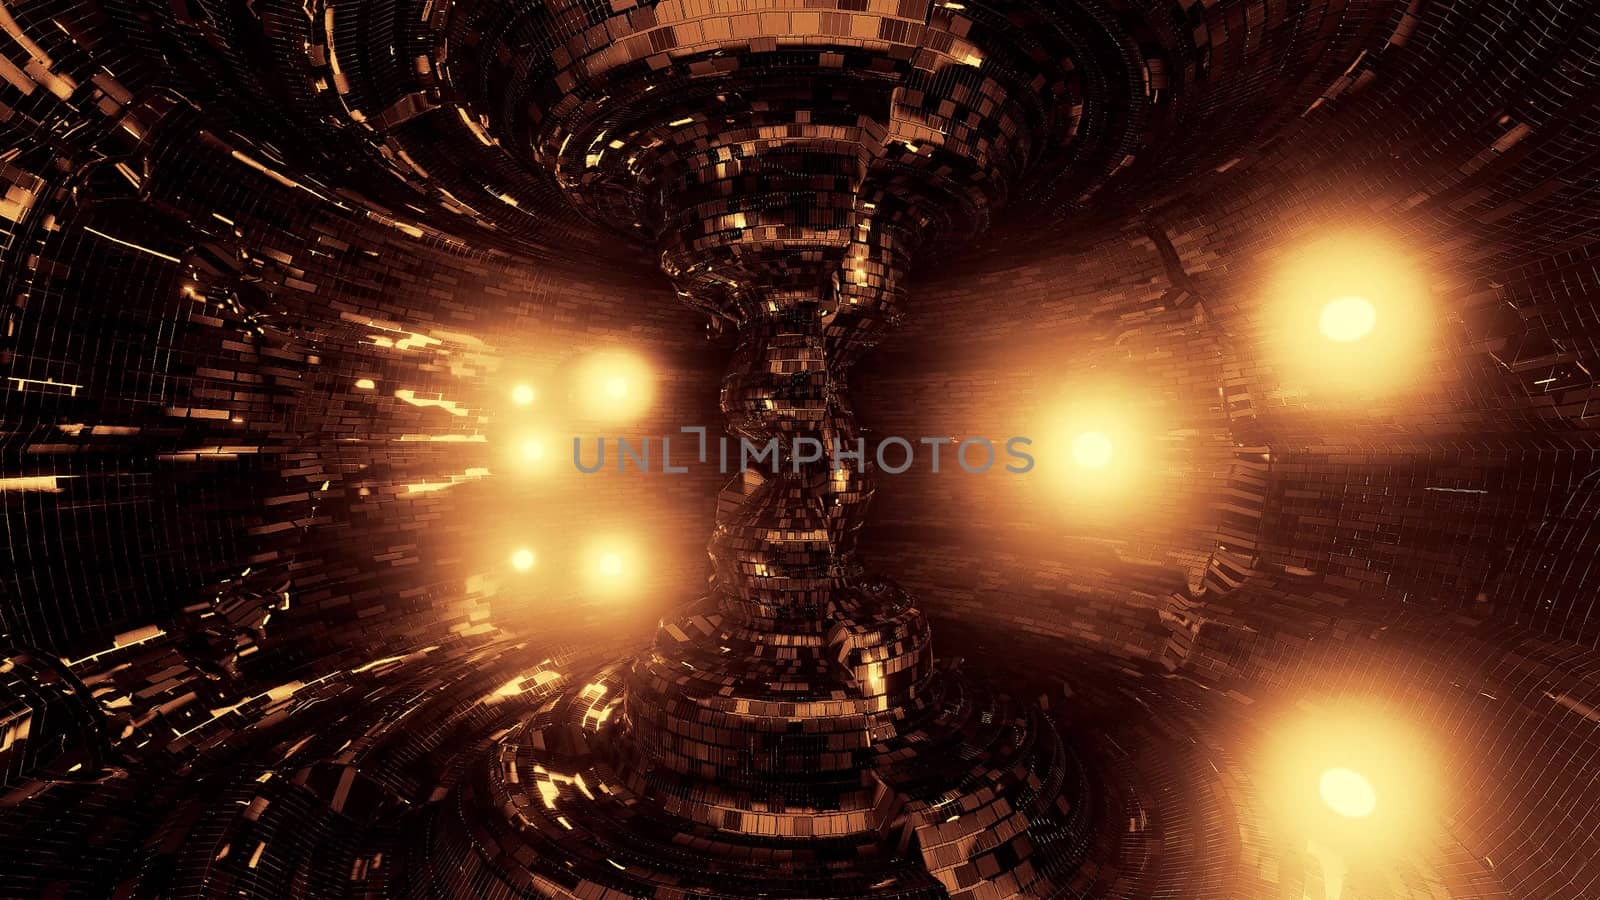 abstract nuclear reactor with glowing atom parrticles and nice reflections 3d illustration background wallpaper by tunnelmotions